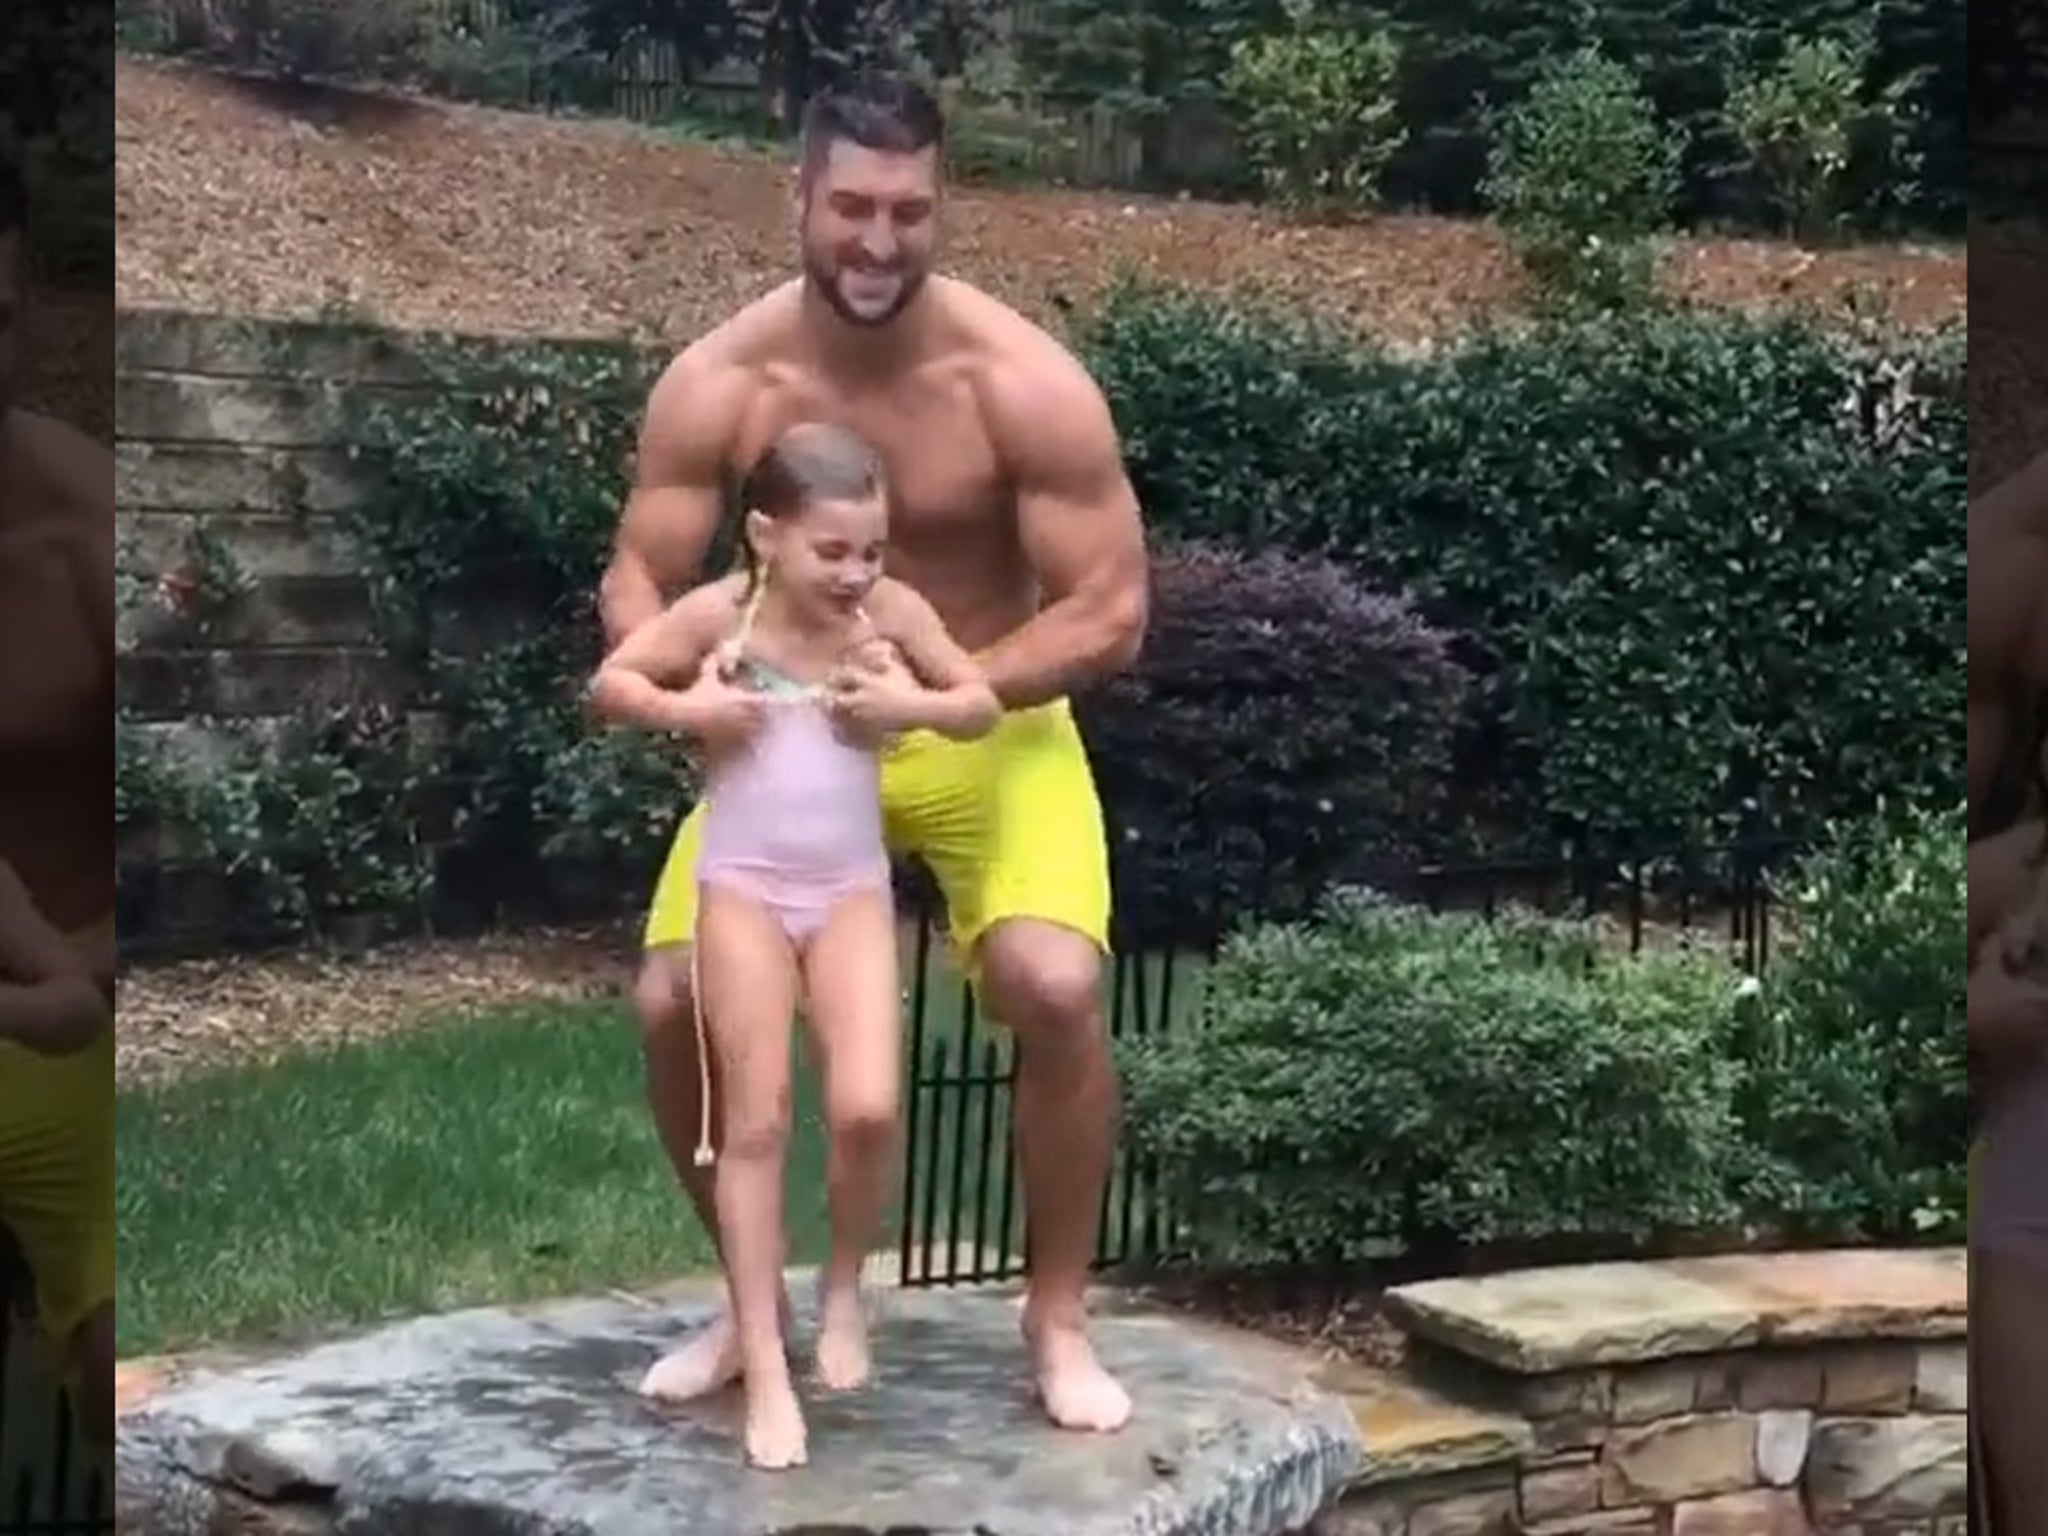 Tim Tebow -- Jacked, Shirtless, Tossing Children